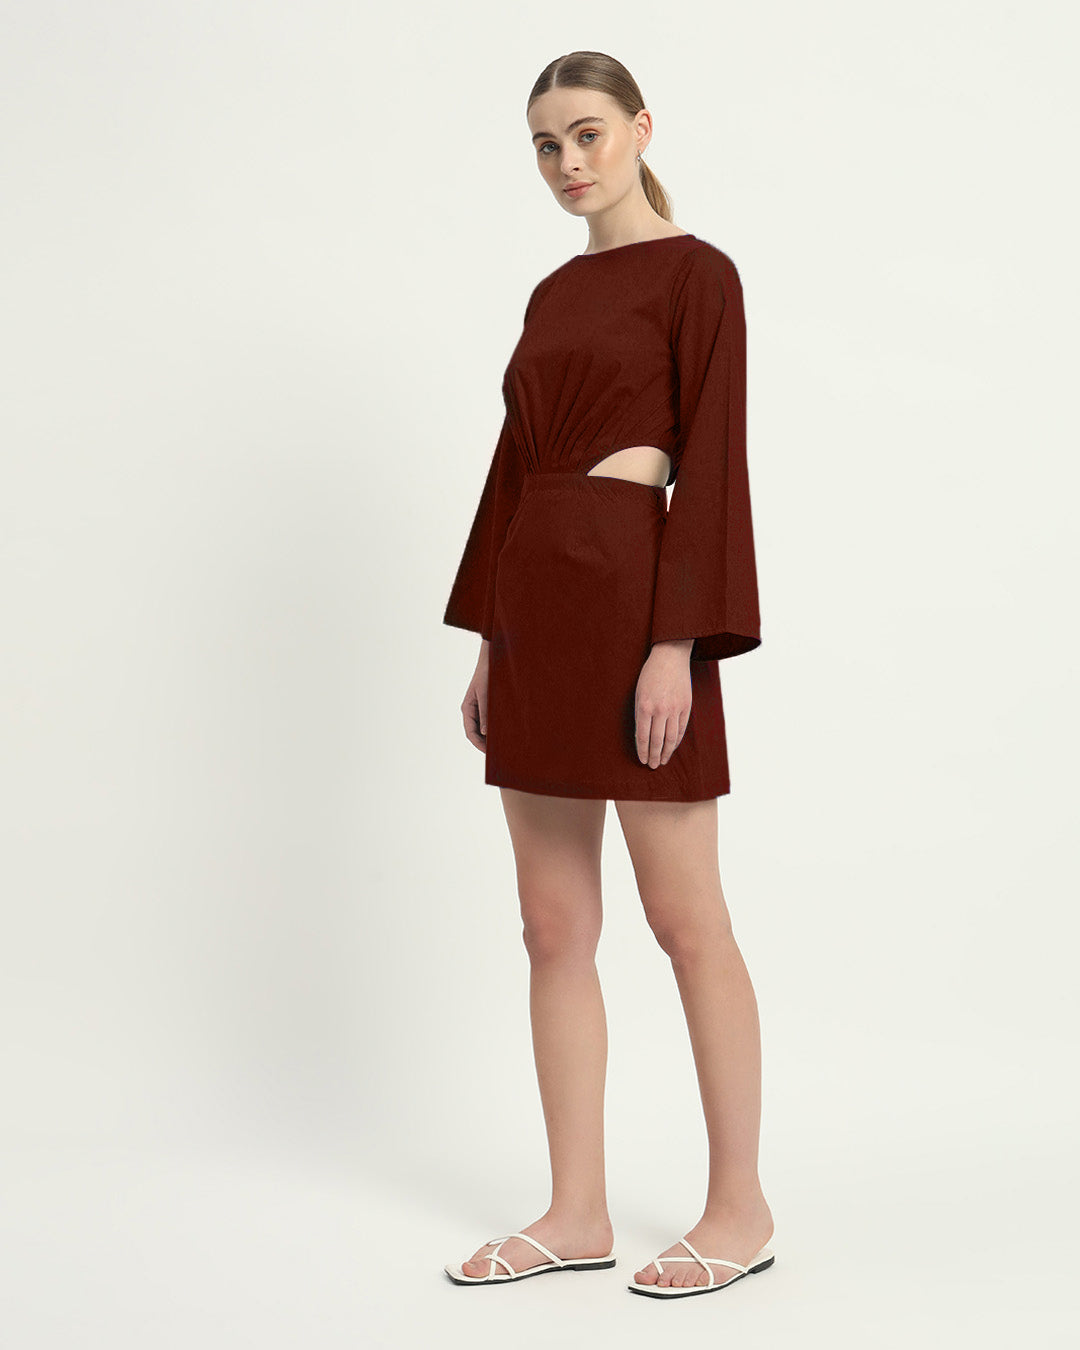 The Eloy Rouge Cotton Dress